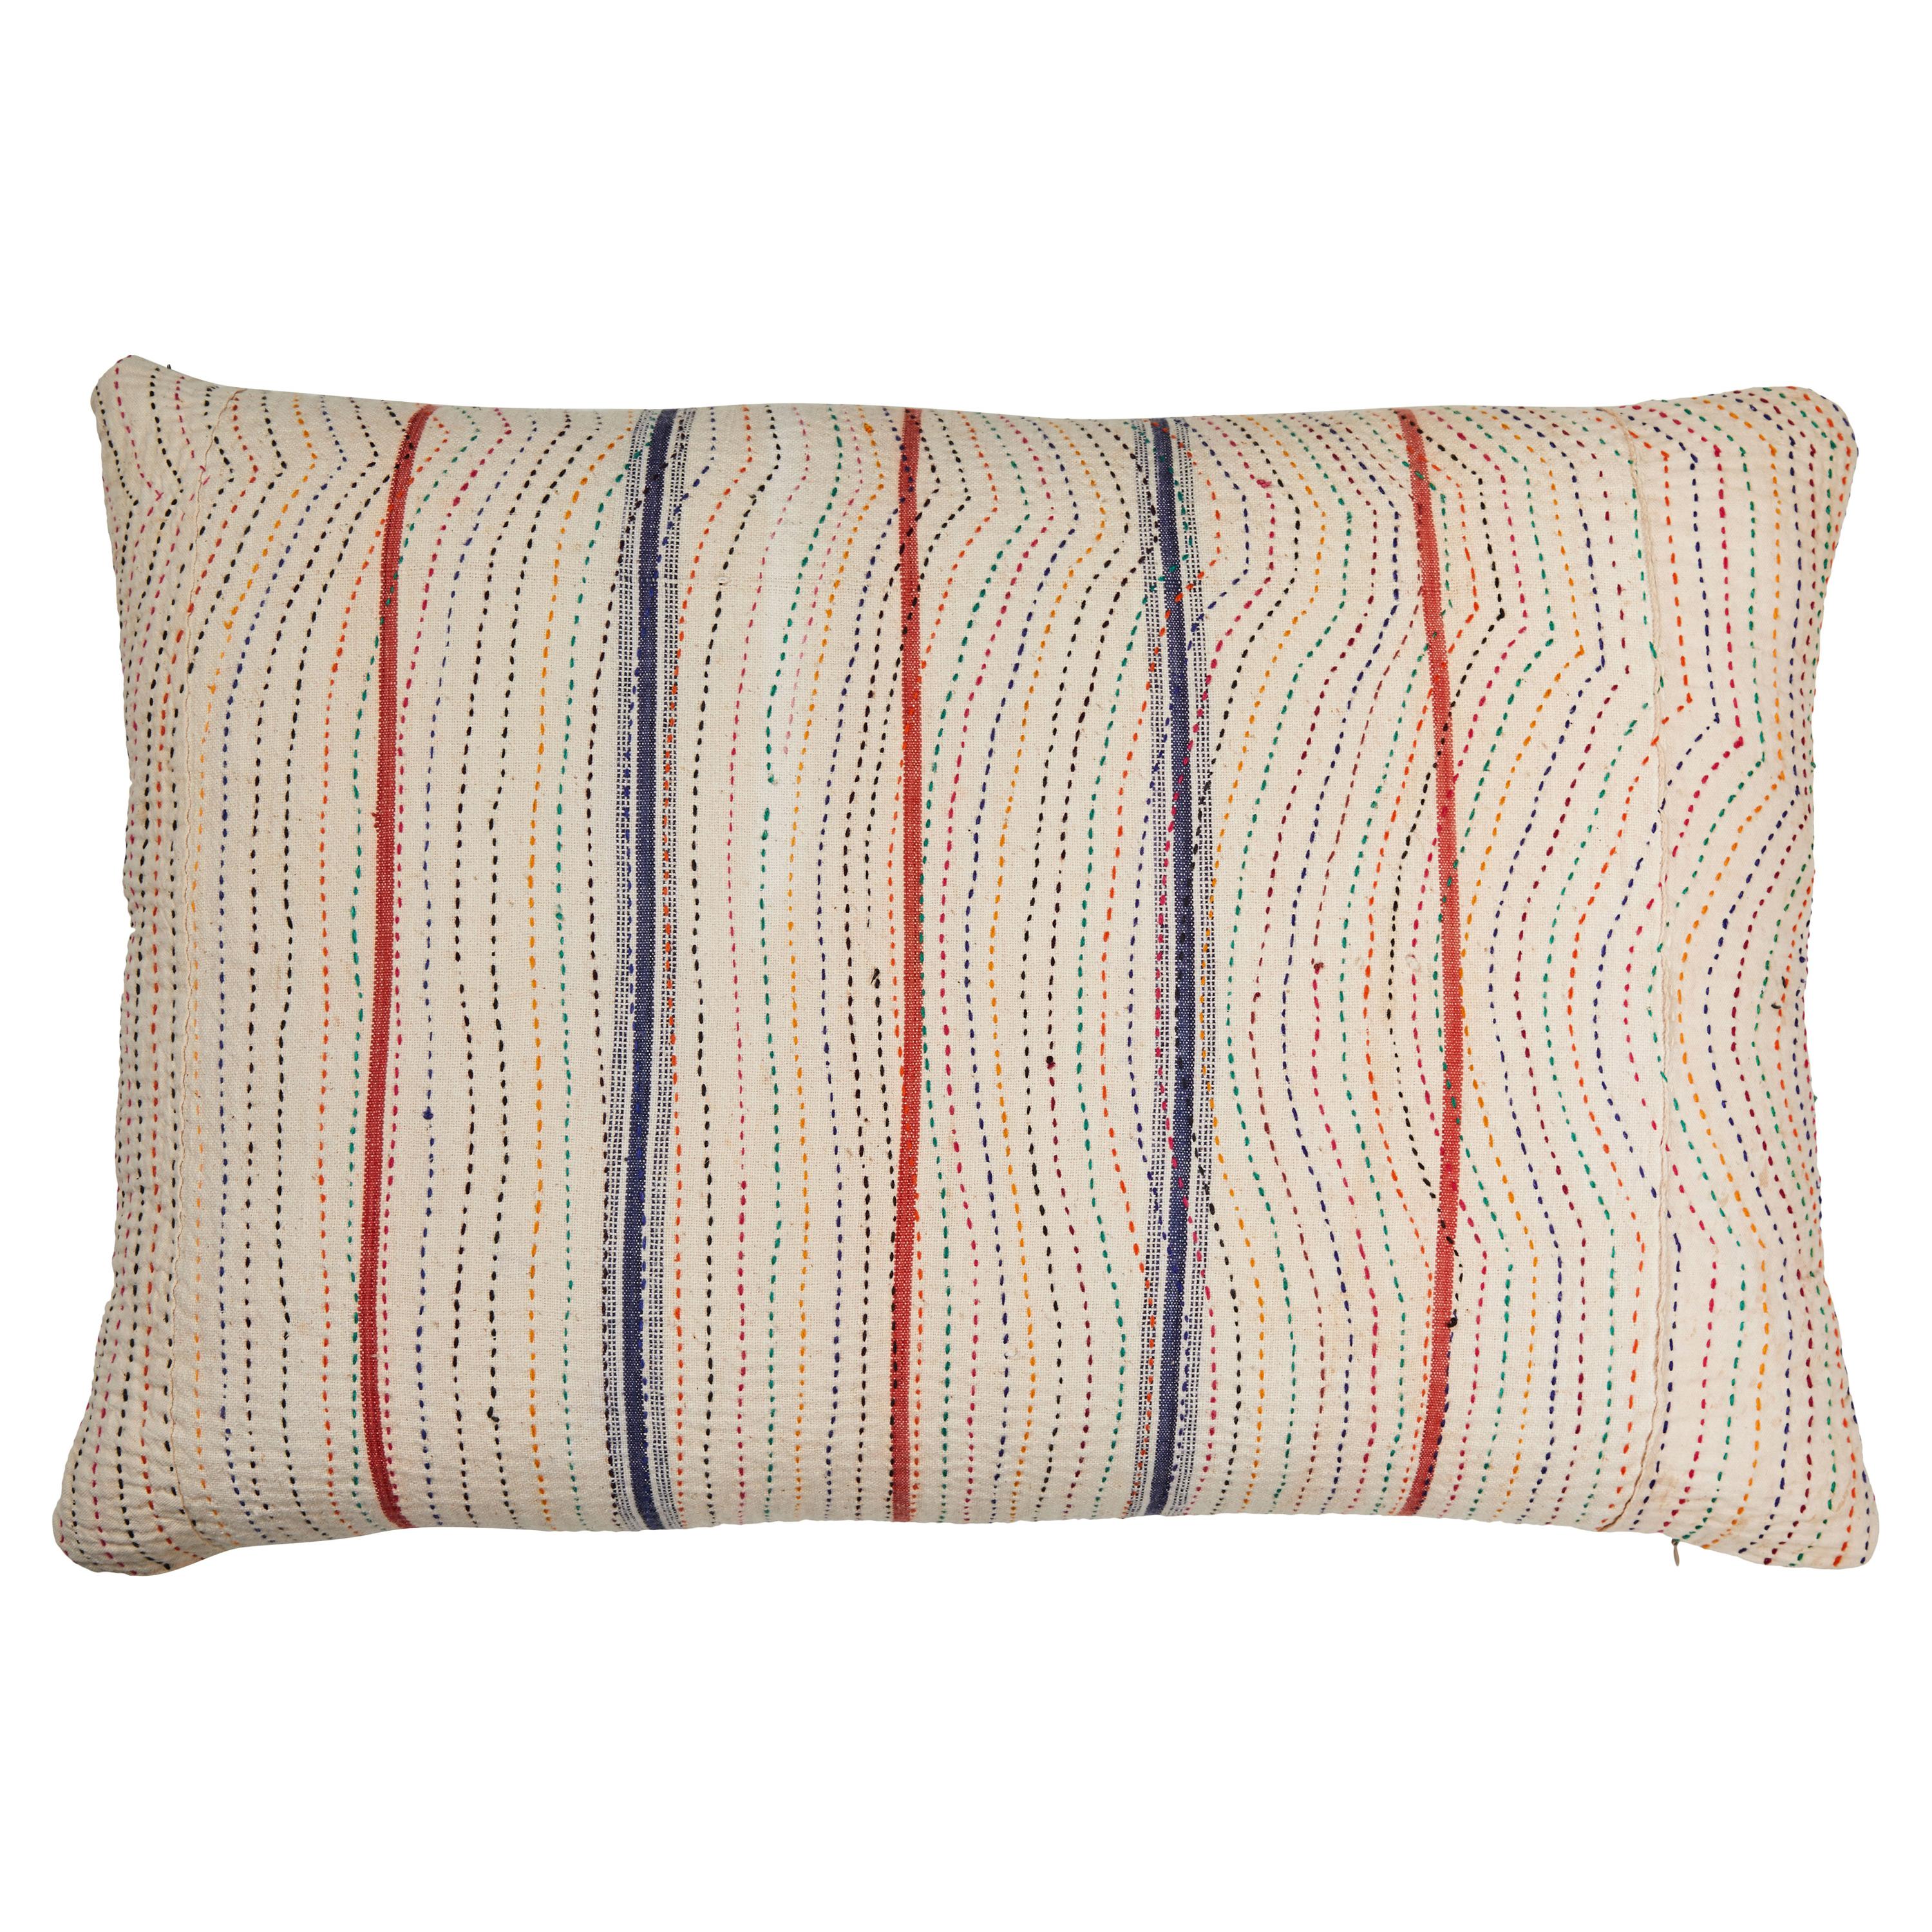 Indian Kantha Stitched Pillow For Sale